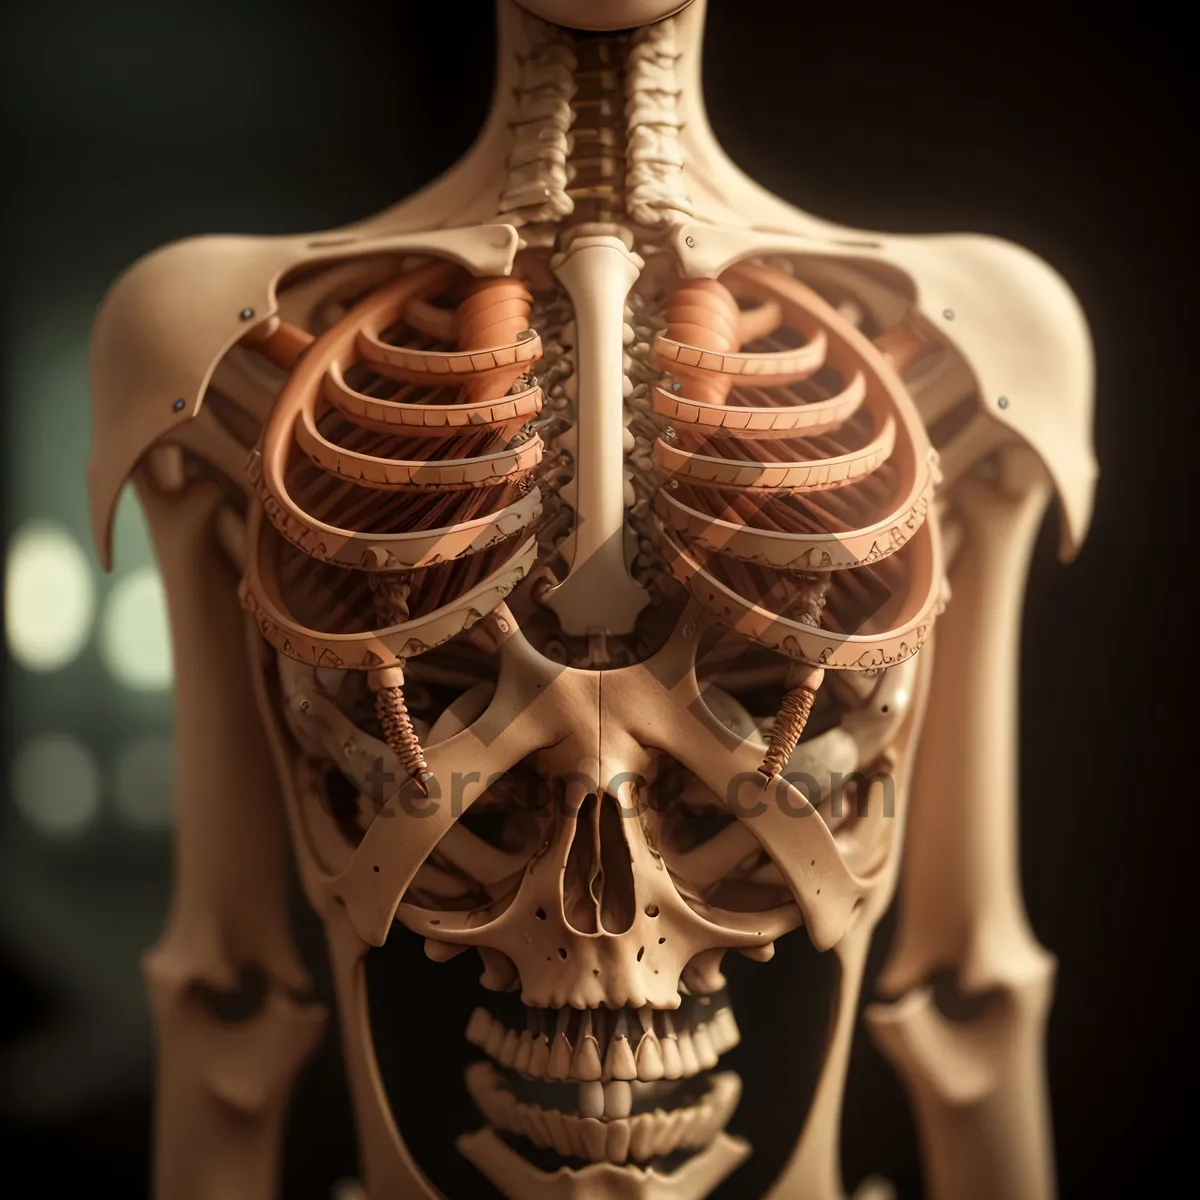 Picture of Transparent 3D Skeleton Anatomy Image Showing Spinal Health